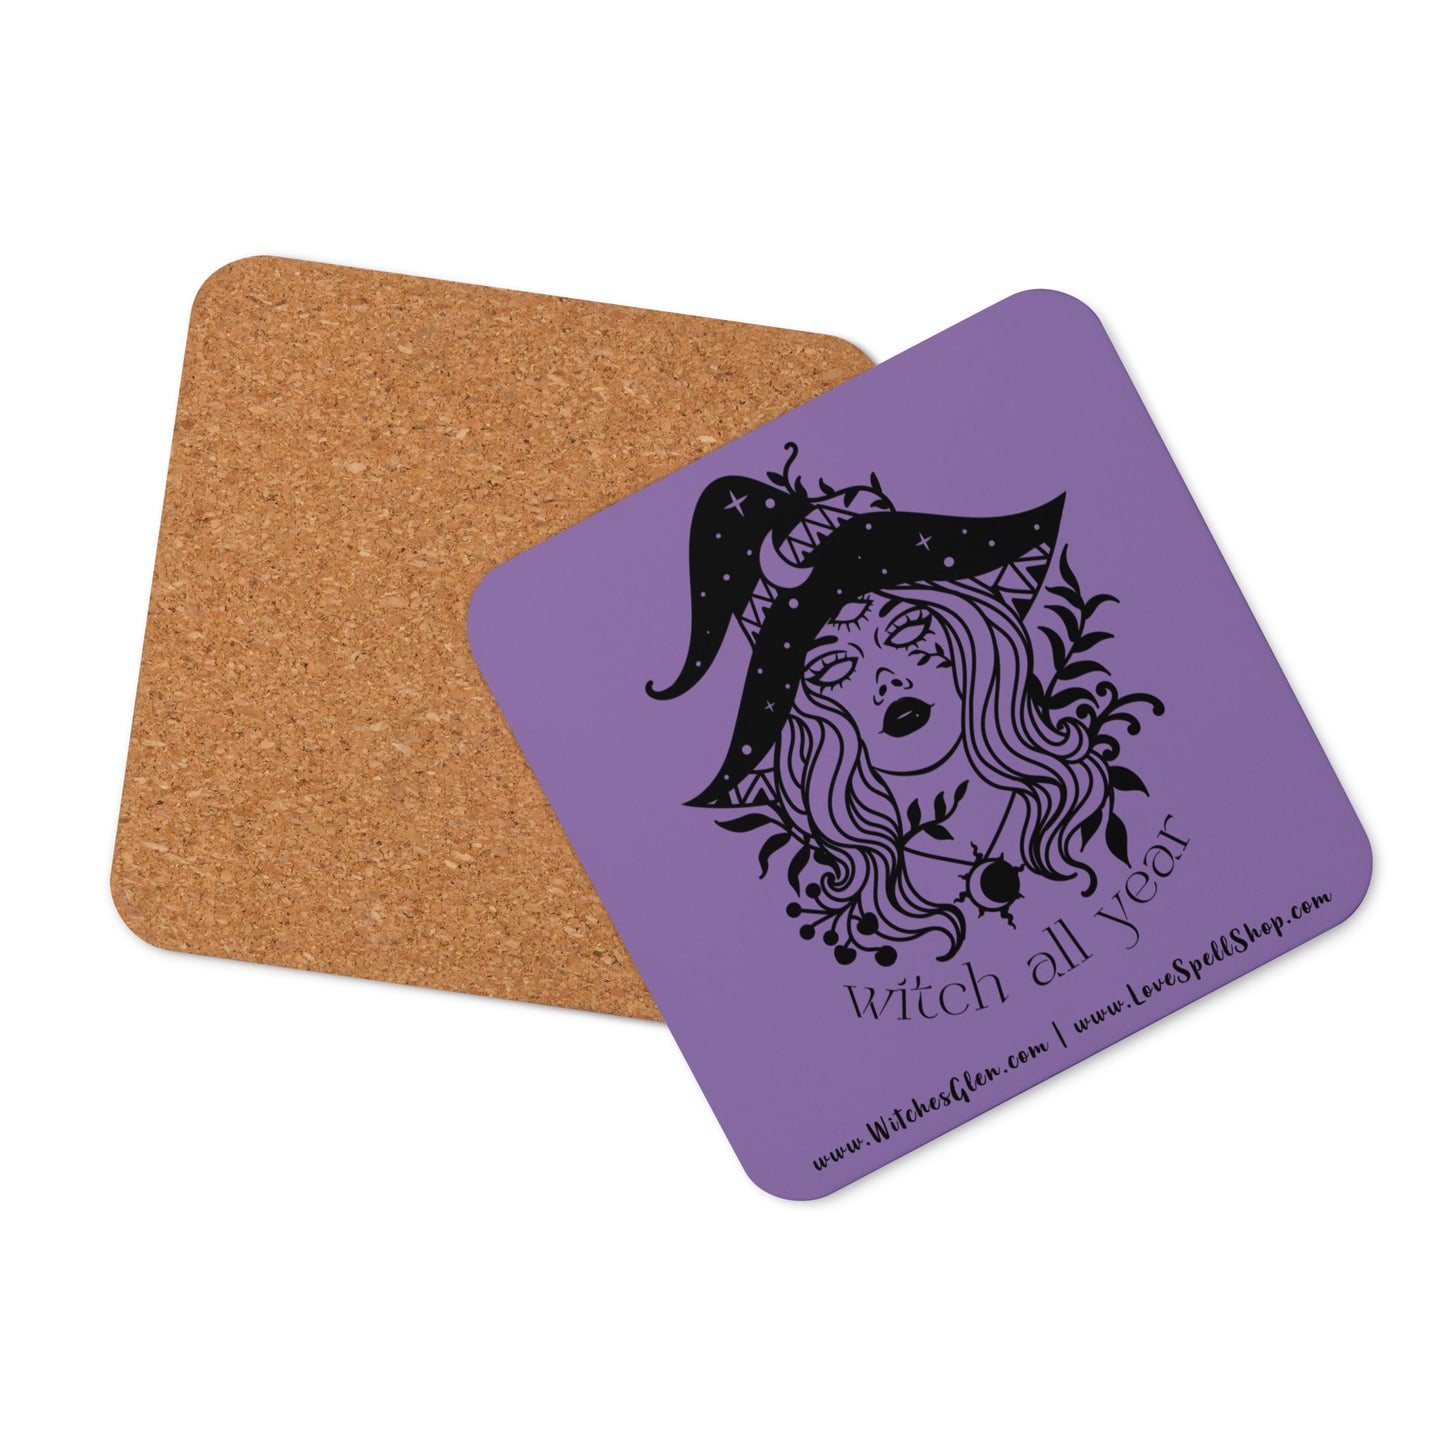 Cork-back Coaster: Witch All Year (ce soir purple)